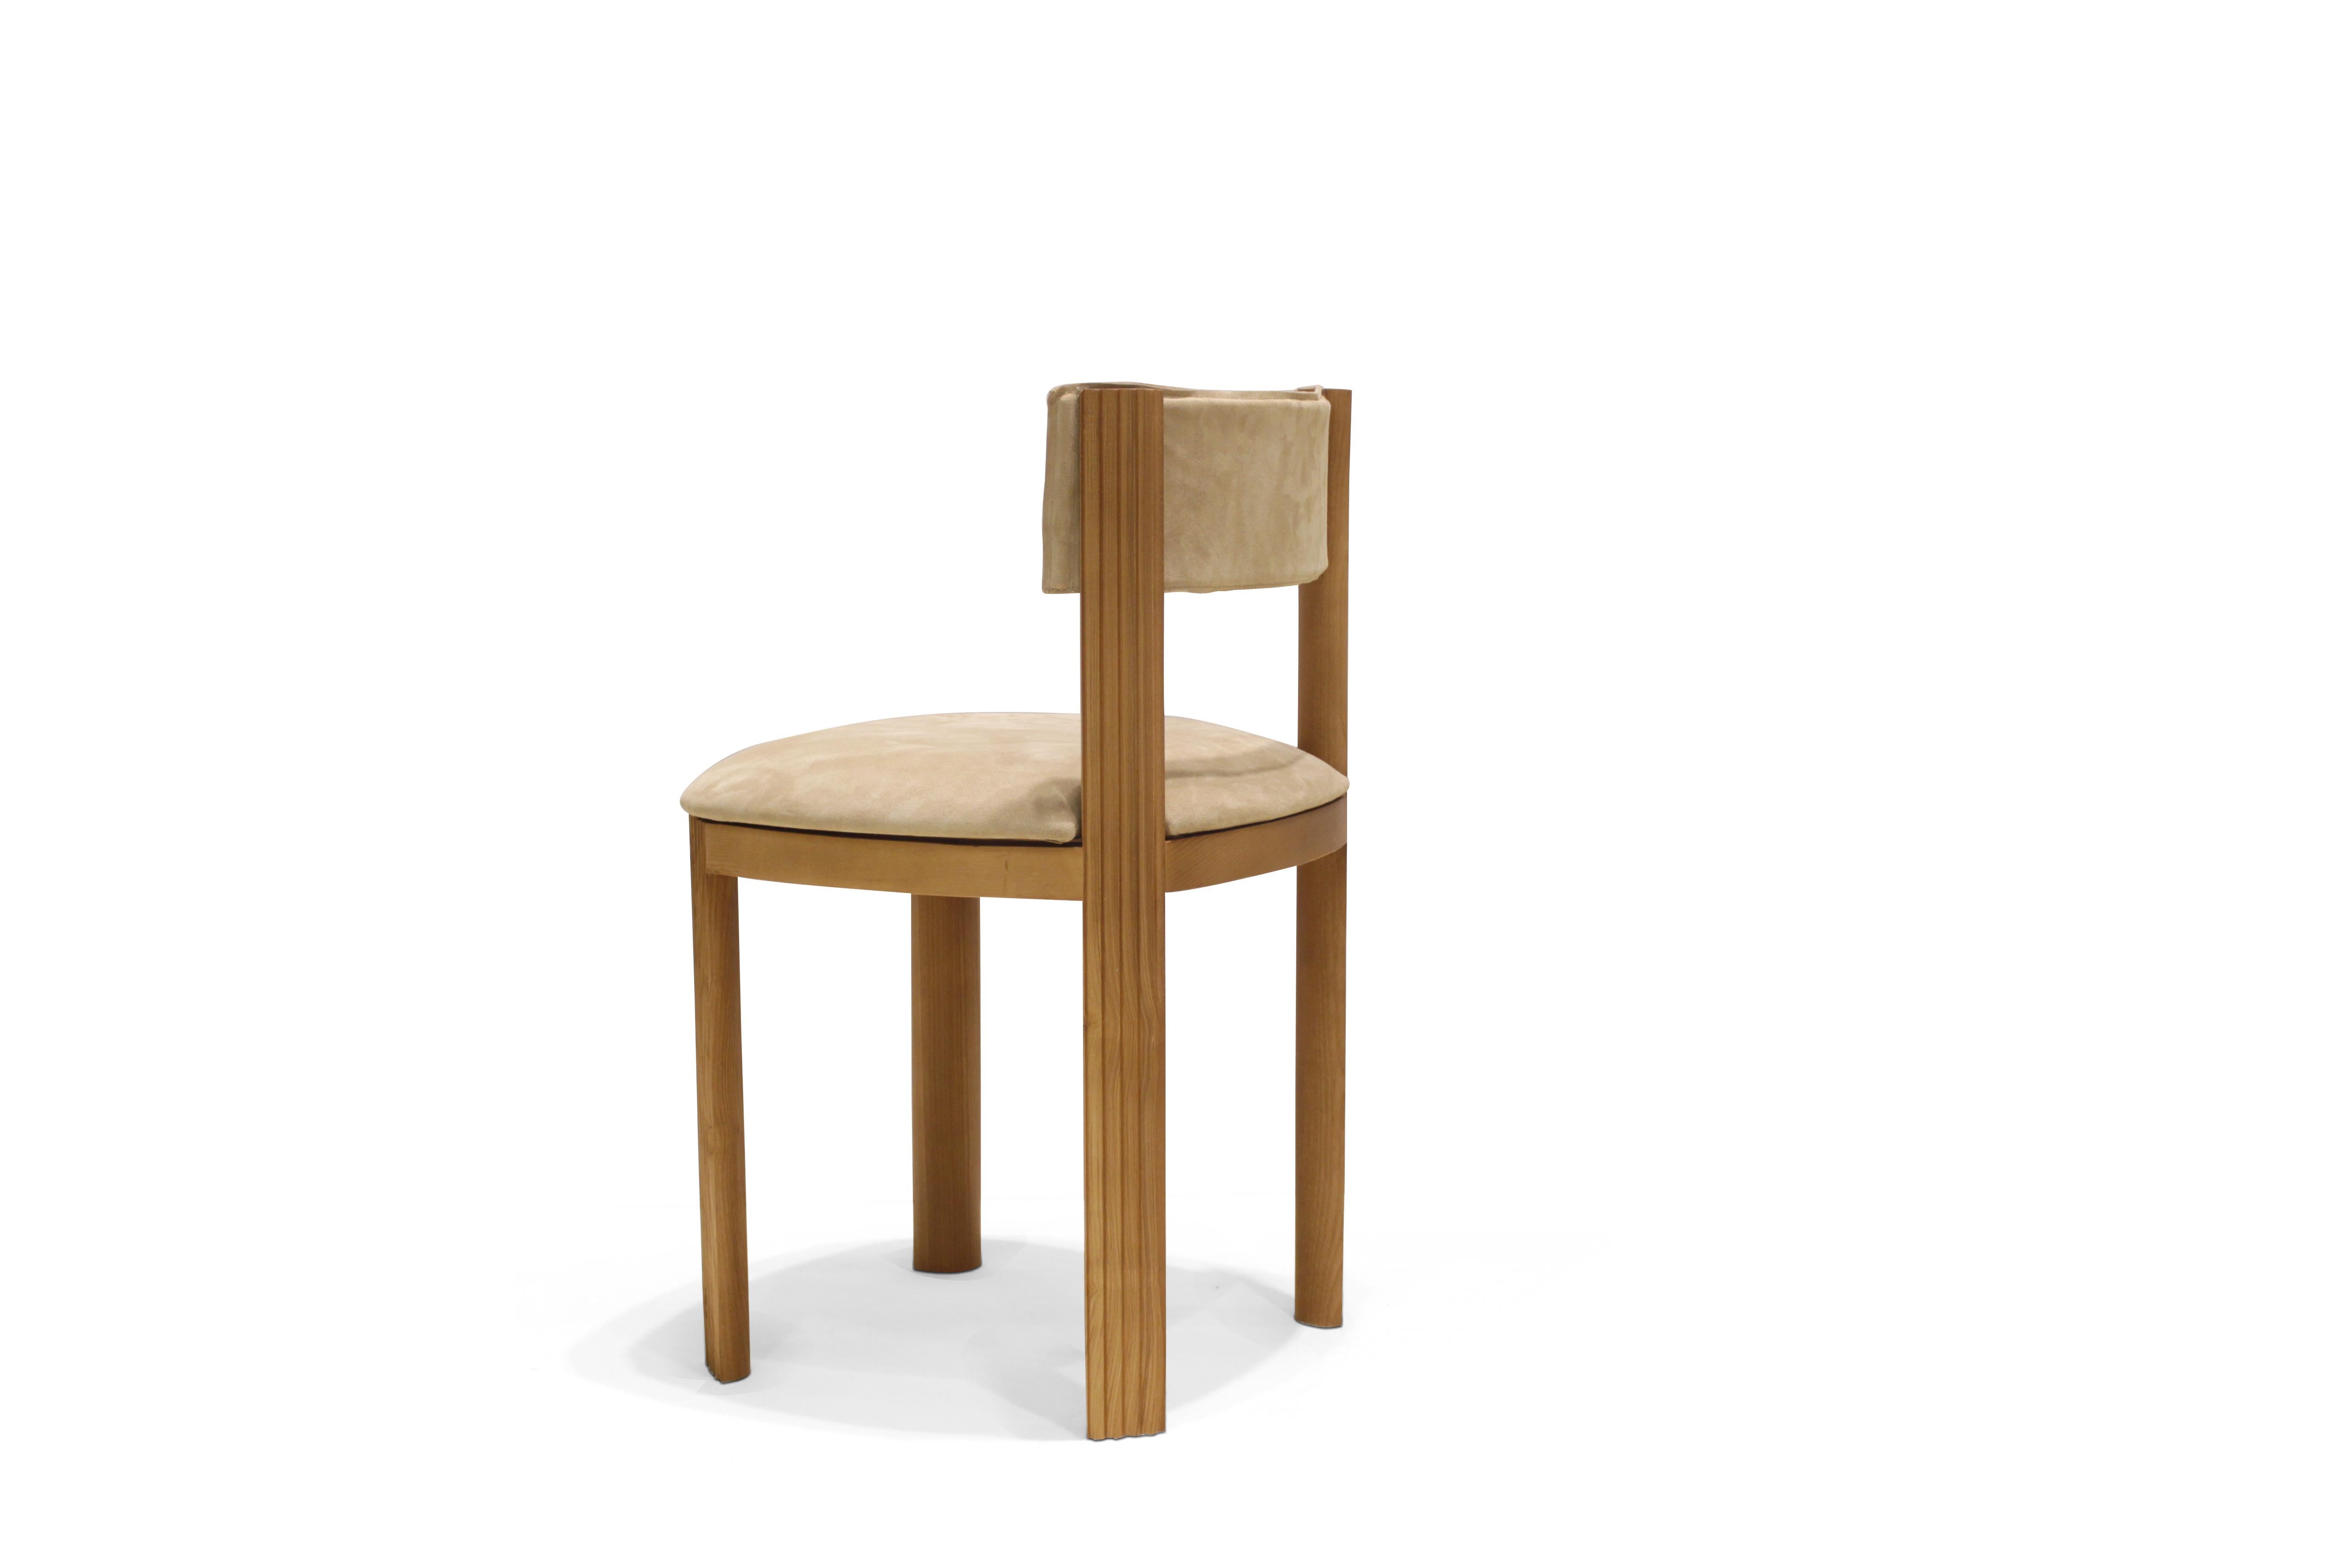 111 dining chair by Collector
Materials: upholstered in genuine velve siege linen.
Solid oak feet
Dimensions: W 45 x D 50 x H 77 cm SH 48 cm

111 represents all the lines incesed in the surface of the solid wood.

The Collector brand aims to